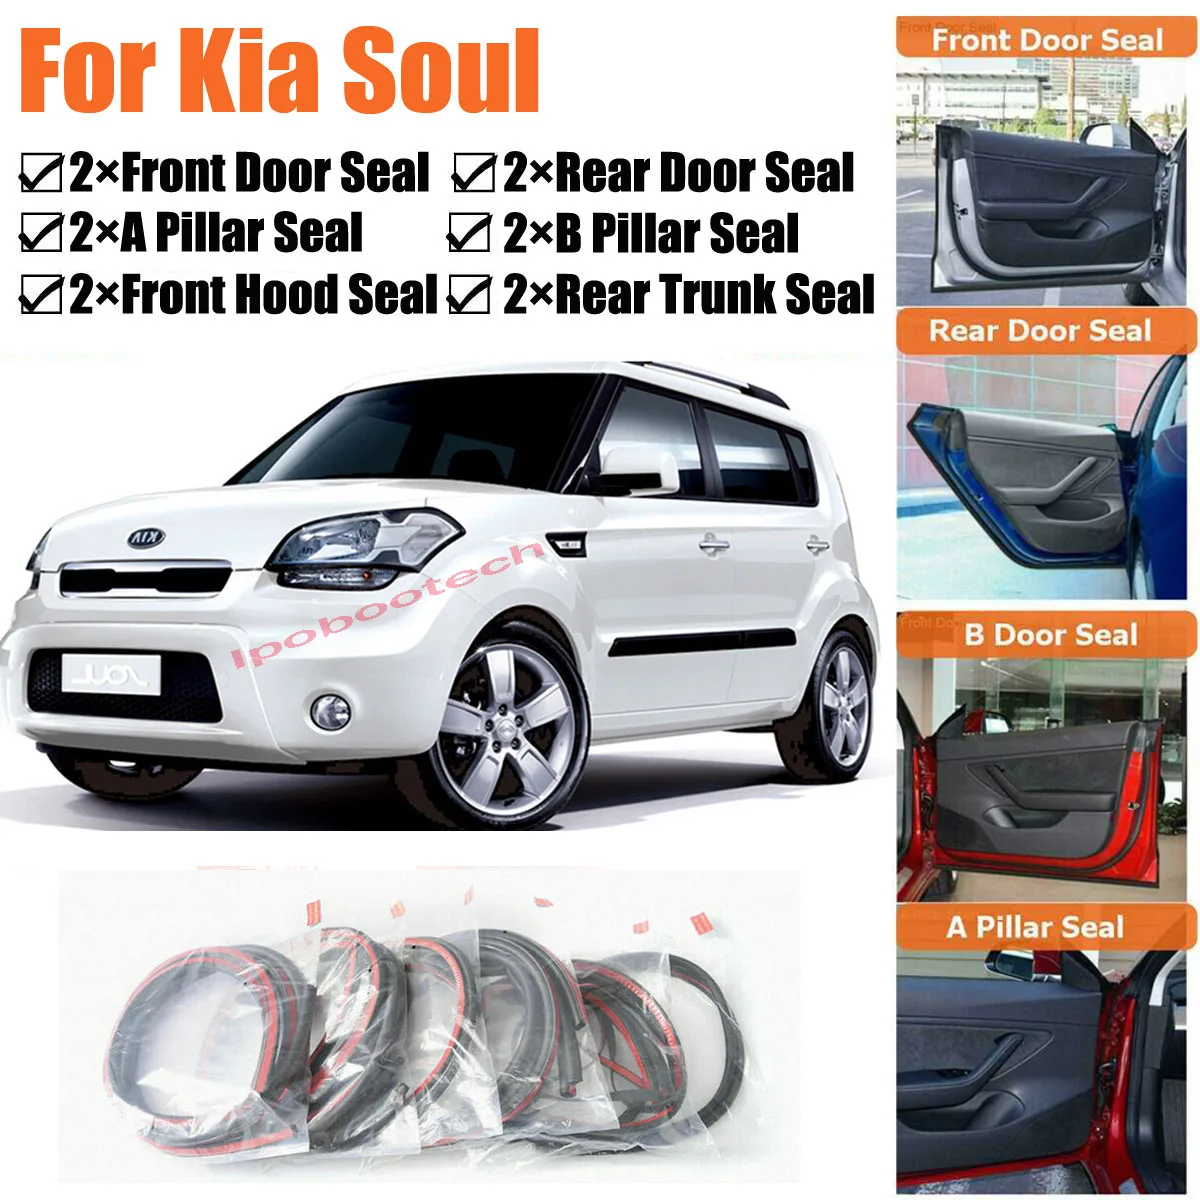 Brand New Car Door Seal Kit Soundproof Rubber Weather Draft Seal Strip Wind Noise Reduction  Fit For kia Soul